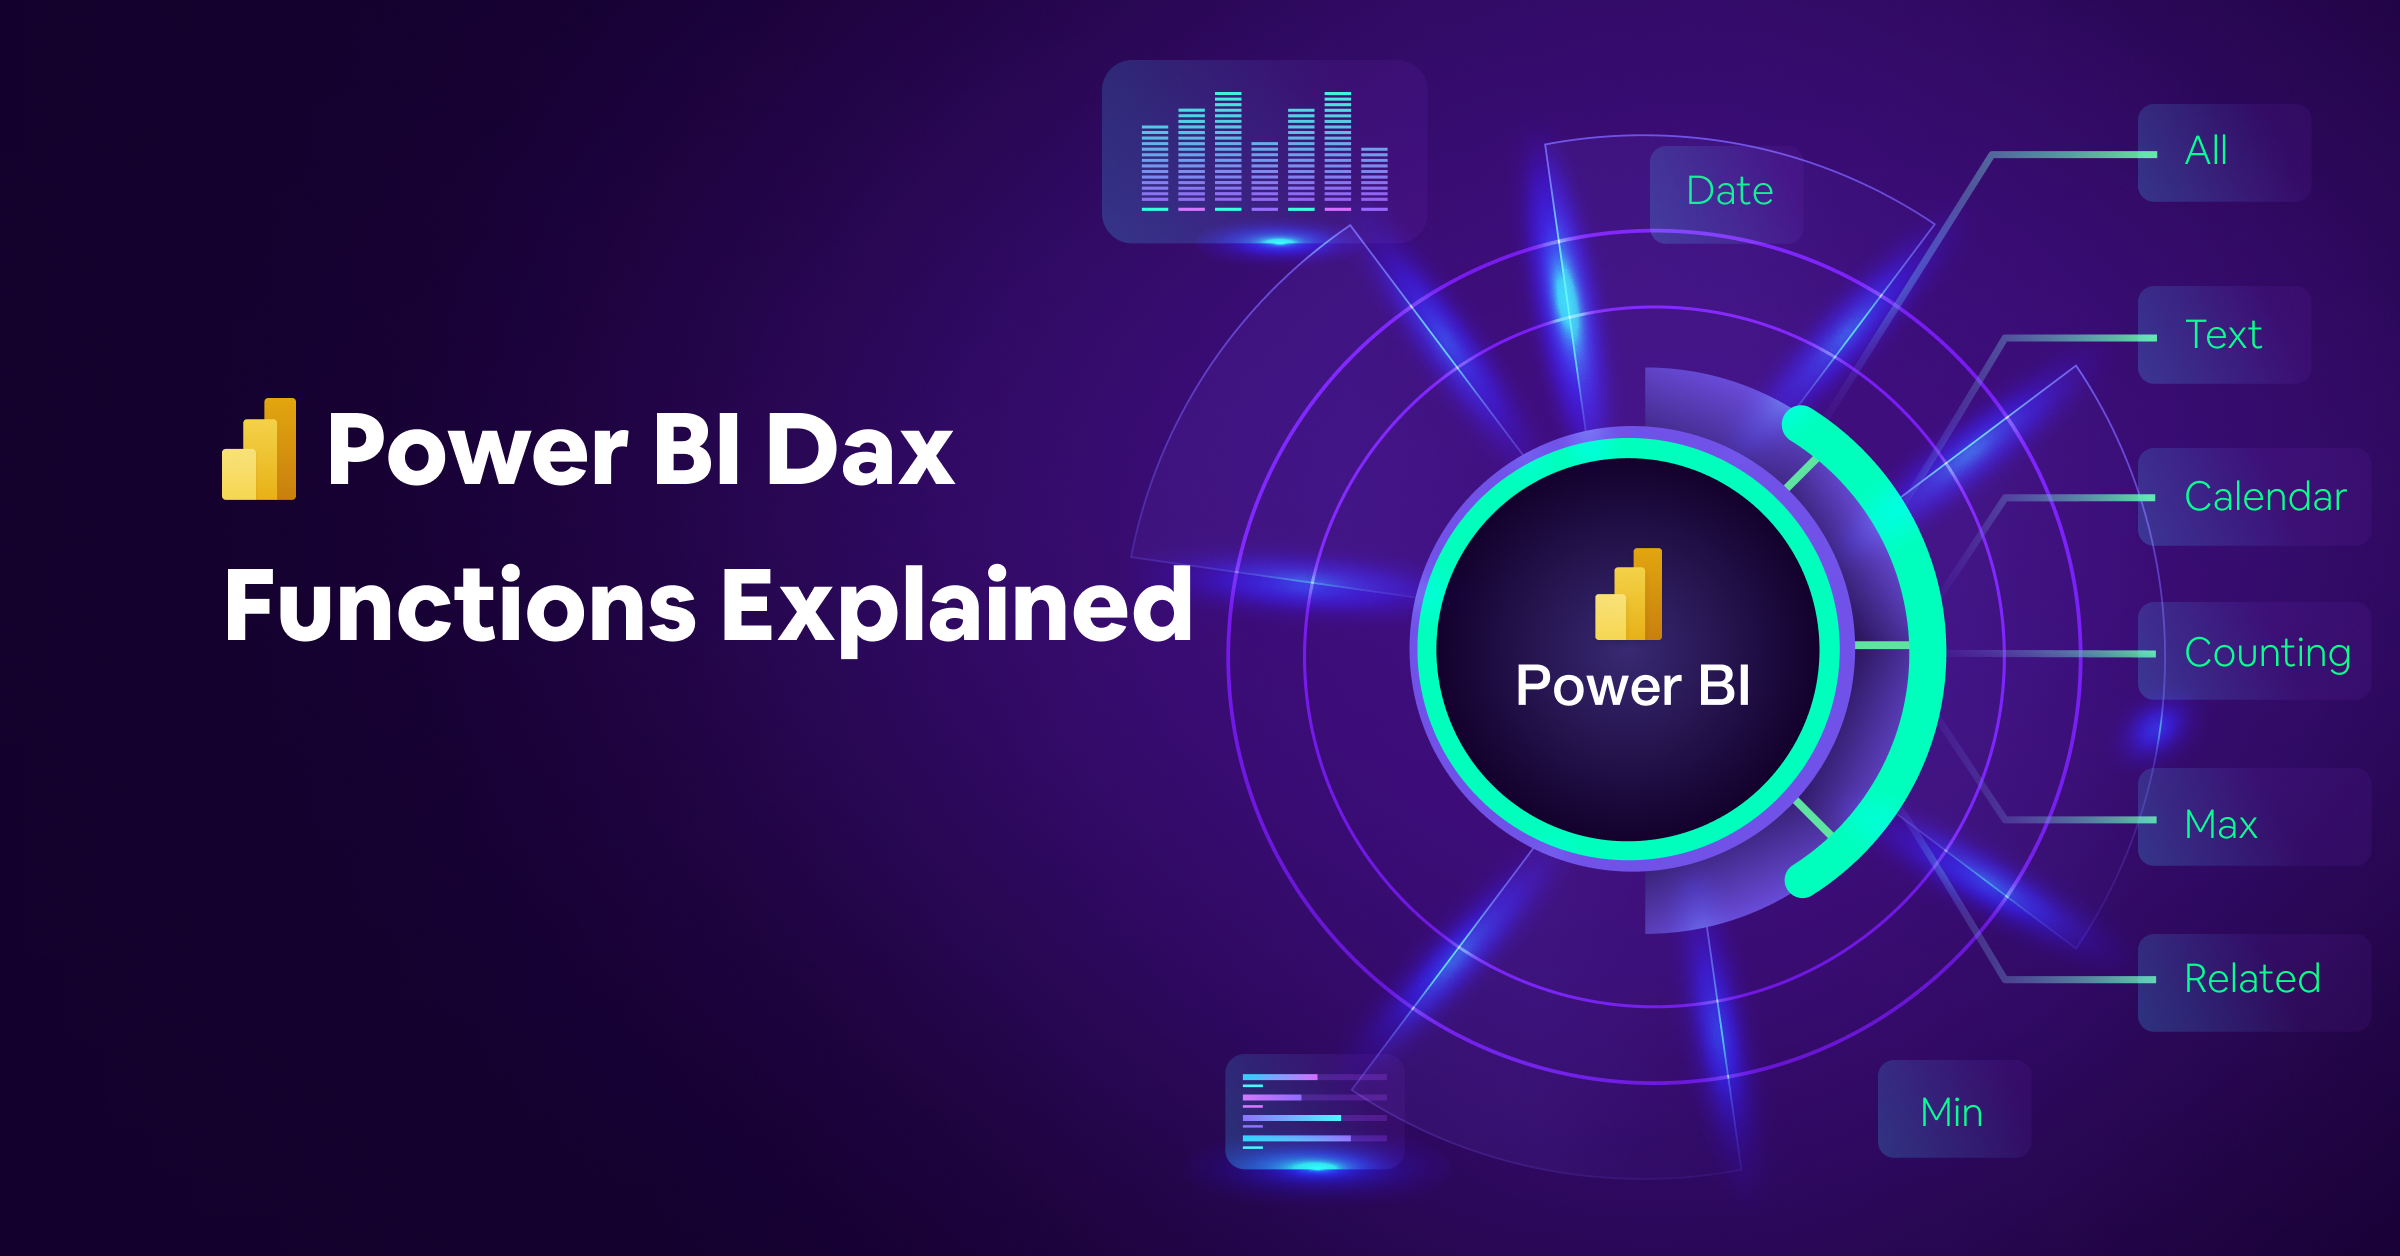 Showing Power BI DAX, a key functionality of Power BI for data calculations & manipulations